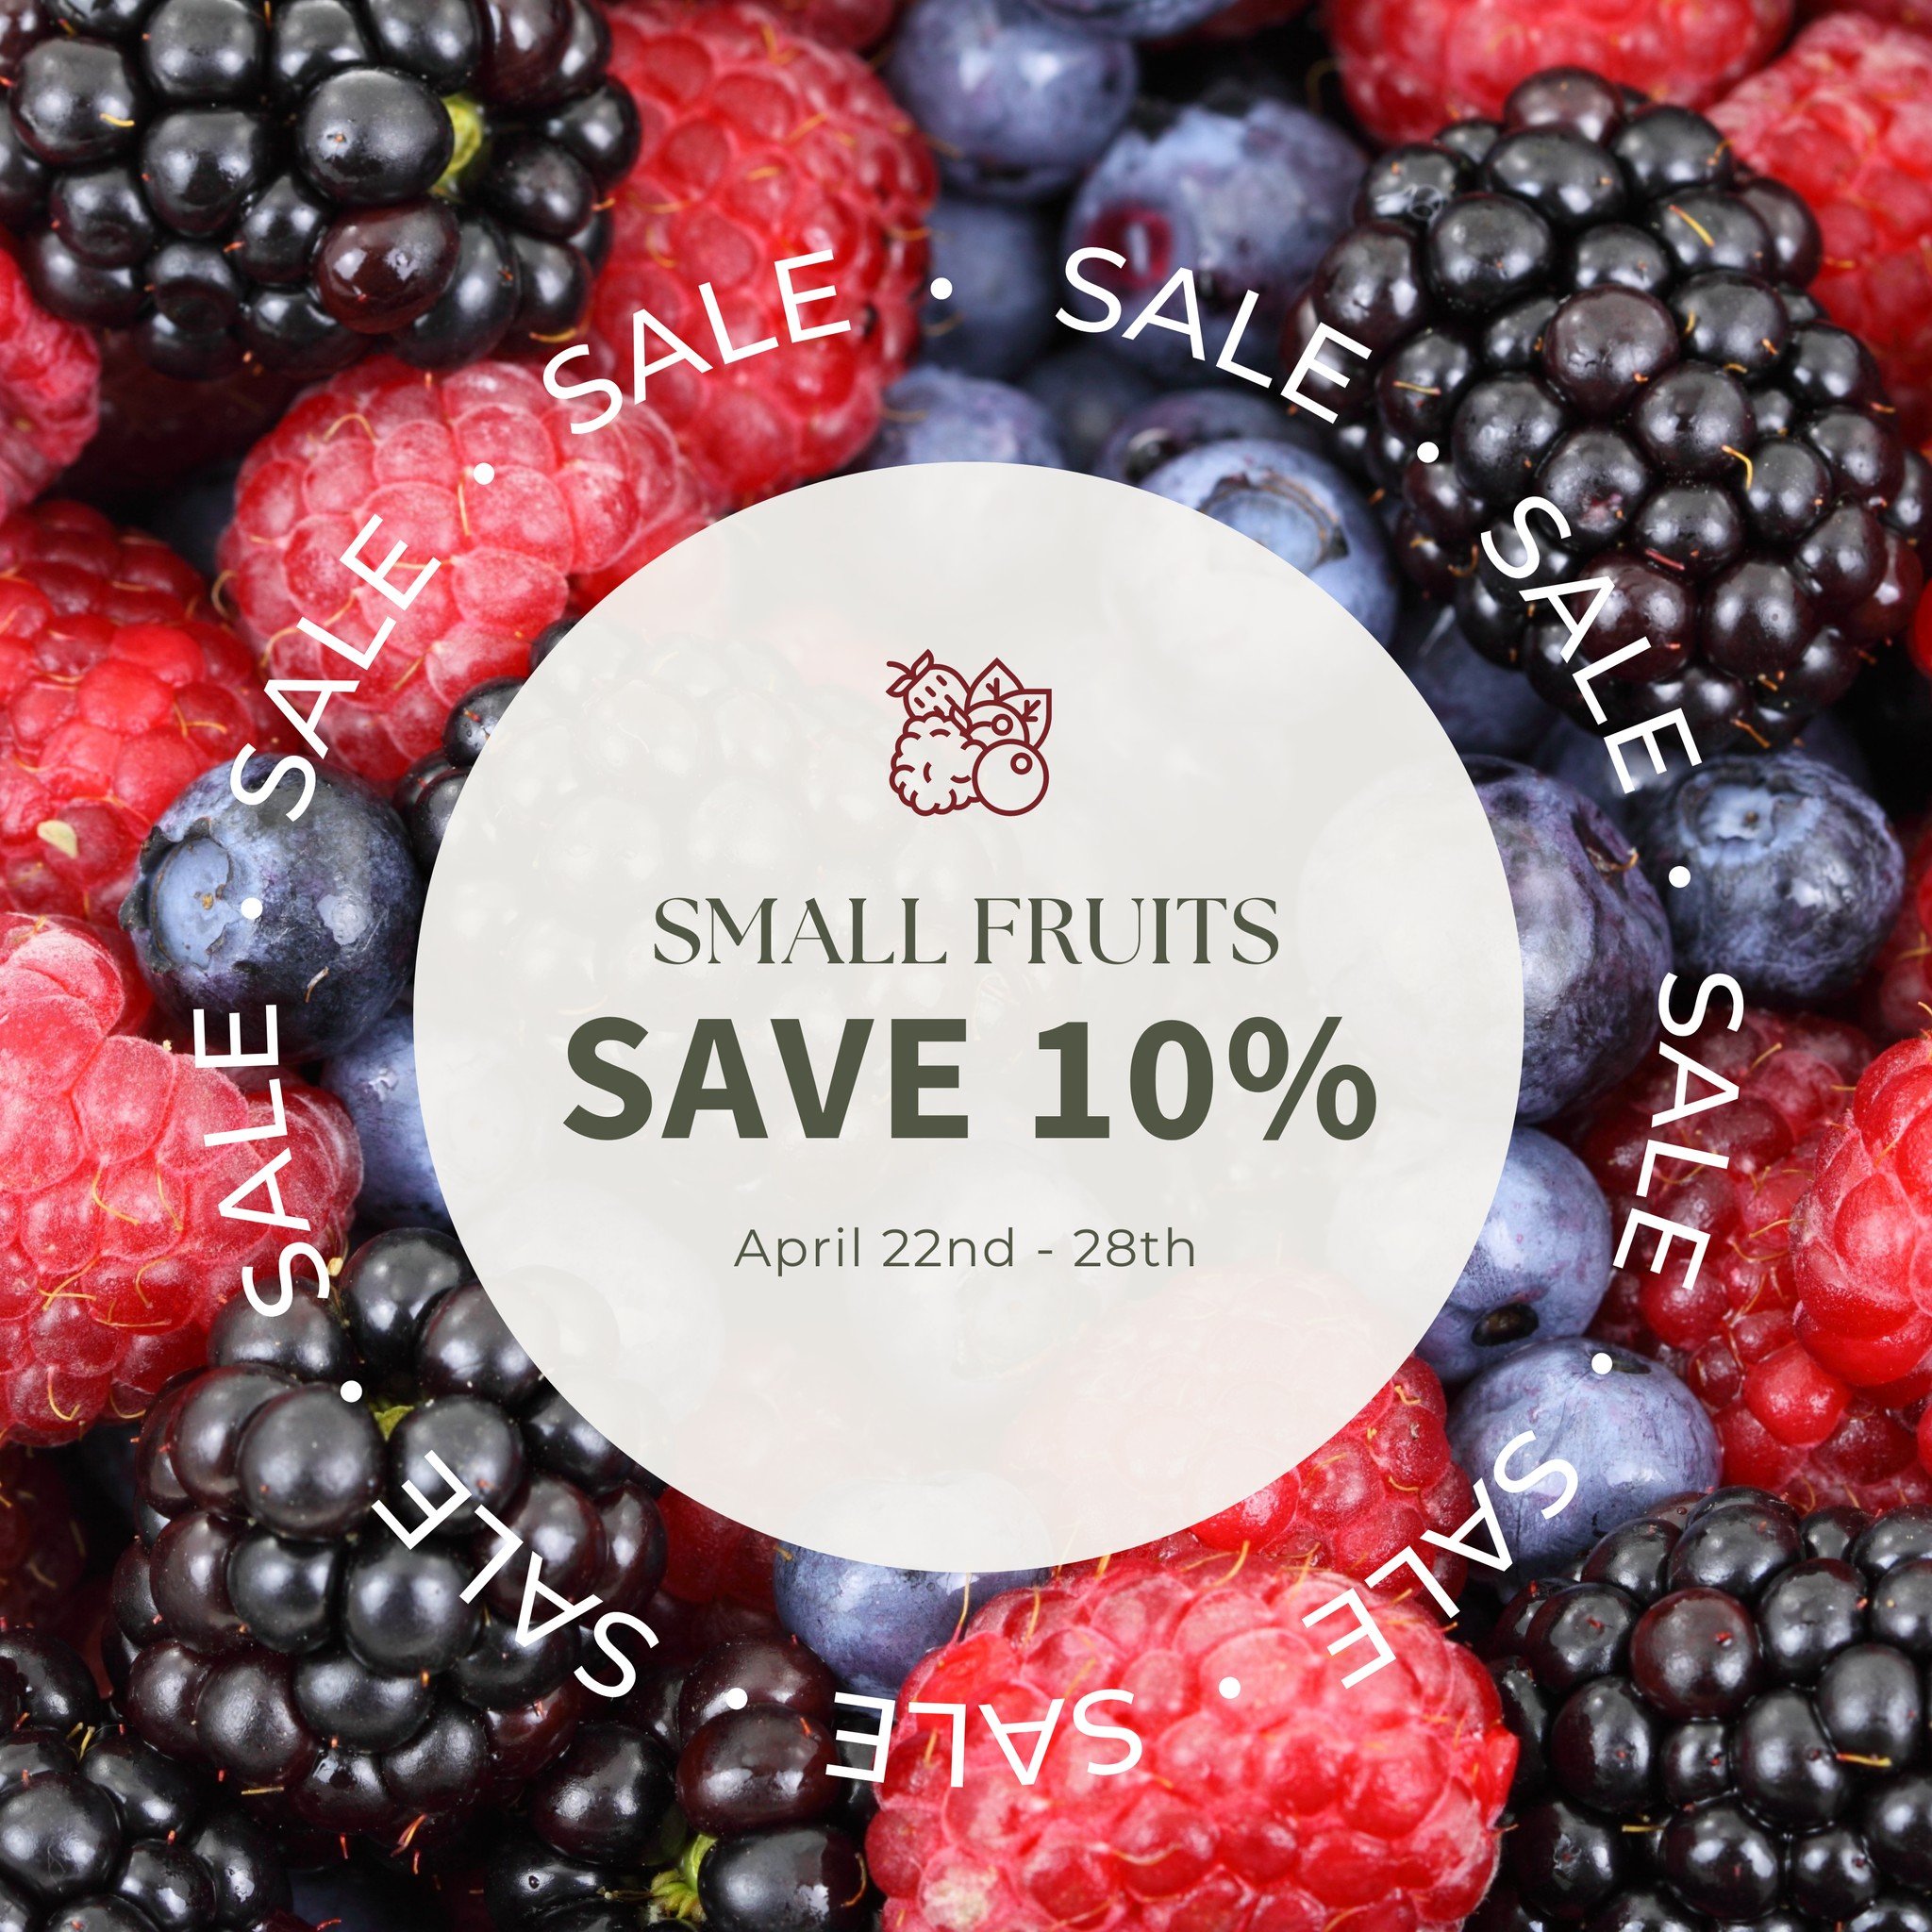 Last Chance tomorrow to Save 10% on Small Fruits! 

Grow what you eat! Eat what you grow! 🫐
*citrus plants &amp; tropical fruits located in the greenhouse are excluded from the sale

#downtoearth #eauclaire #gardencenter #smallfruits #blueberries #r